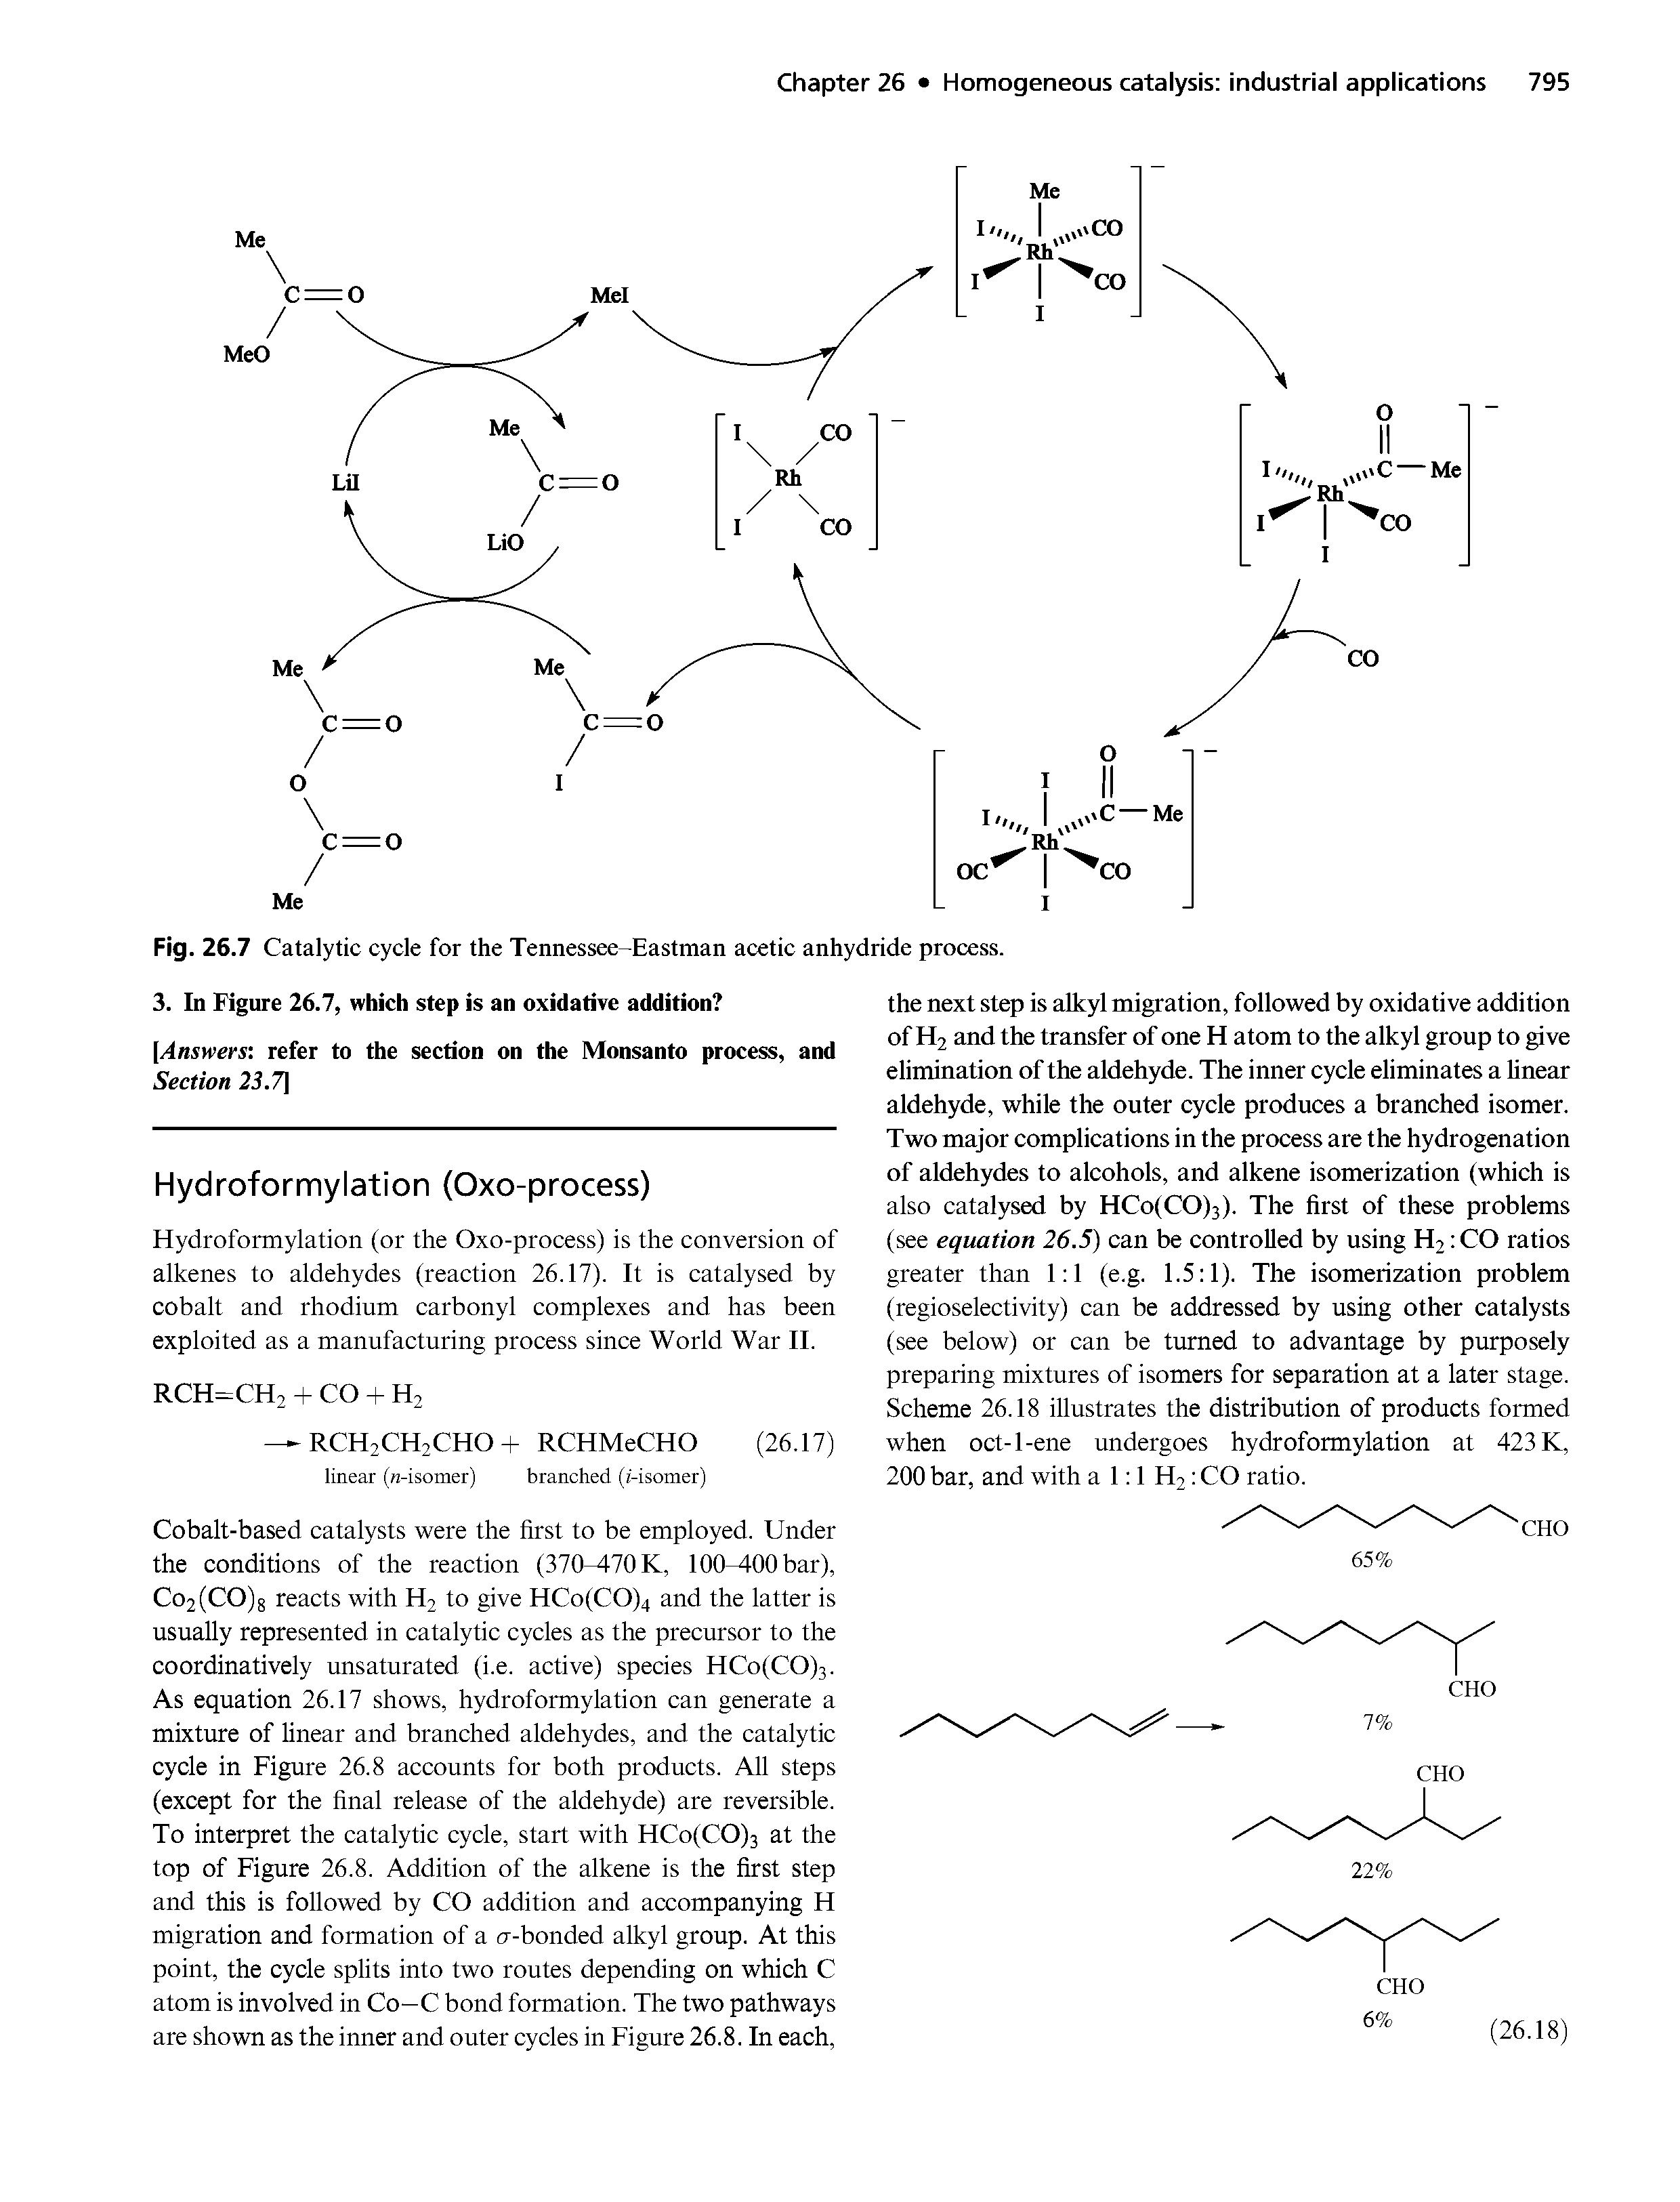 Fig. 26.7 Catalytic cycle for the Tennessee-Eastman acetic anhydride process. 3. In Figure 26.7, which step is an oxidative addition ...